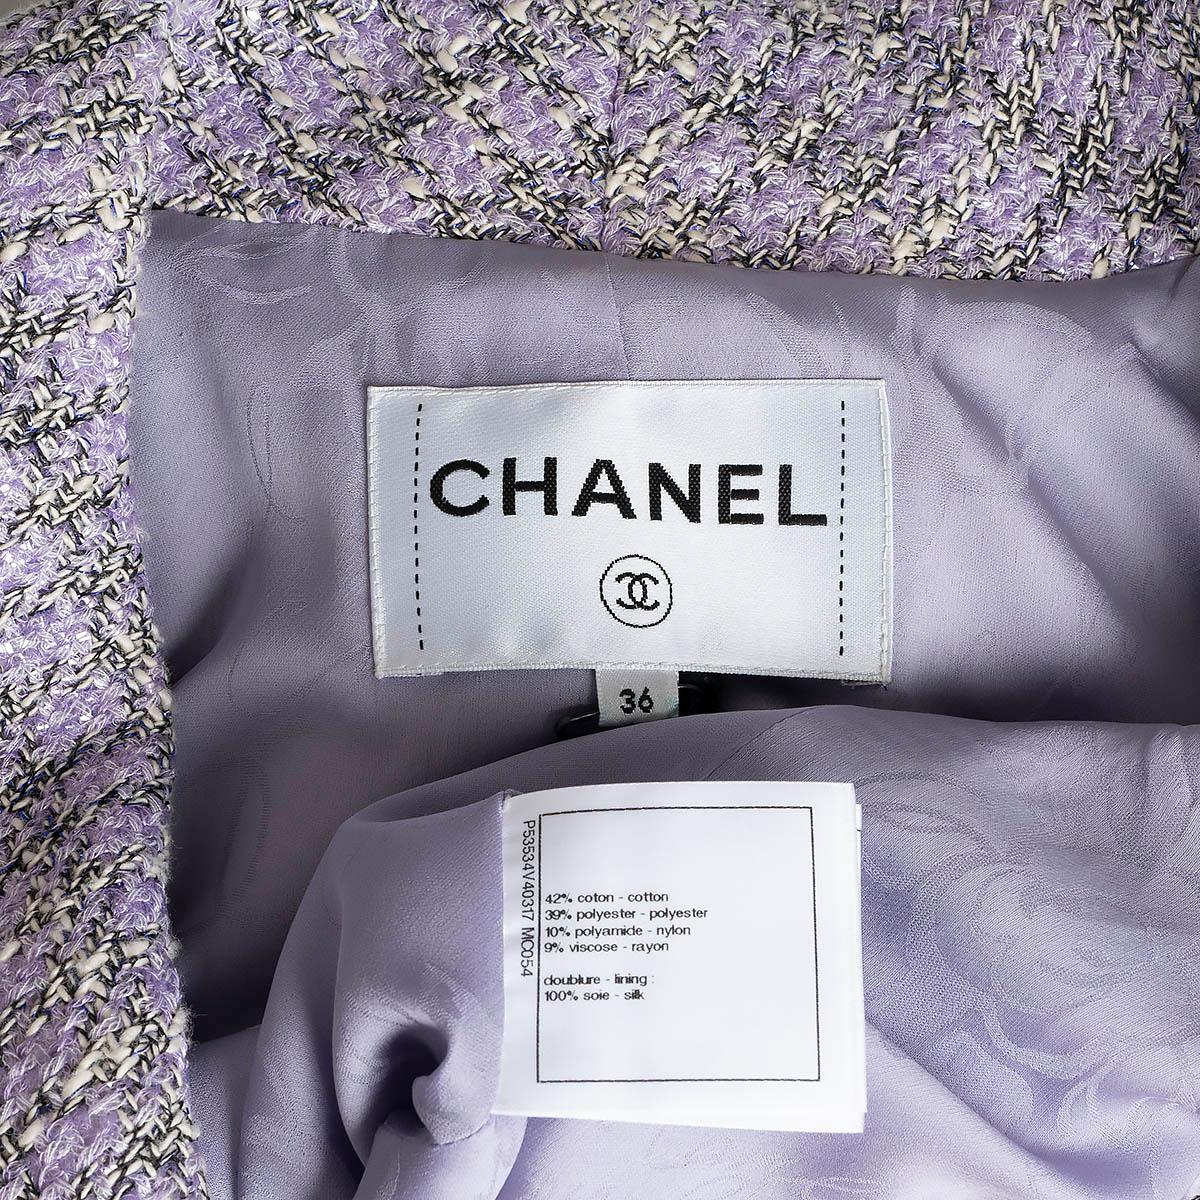 CHANEL lilac cotton 2016 16S SHAWL COLLAR IRIDESCENT TWEED Jacket 36 XS For Sale 4